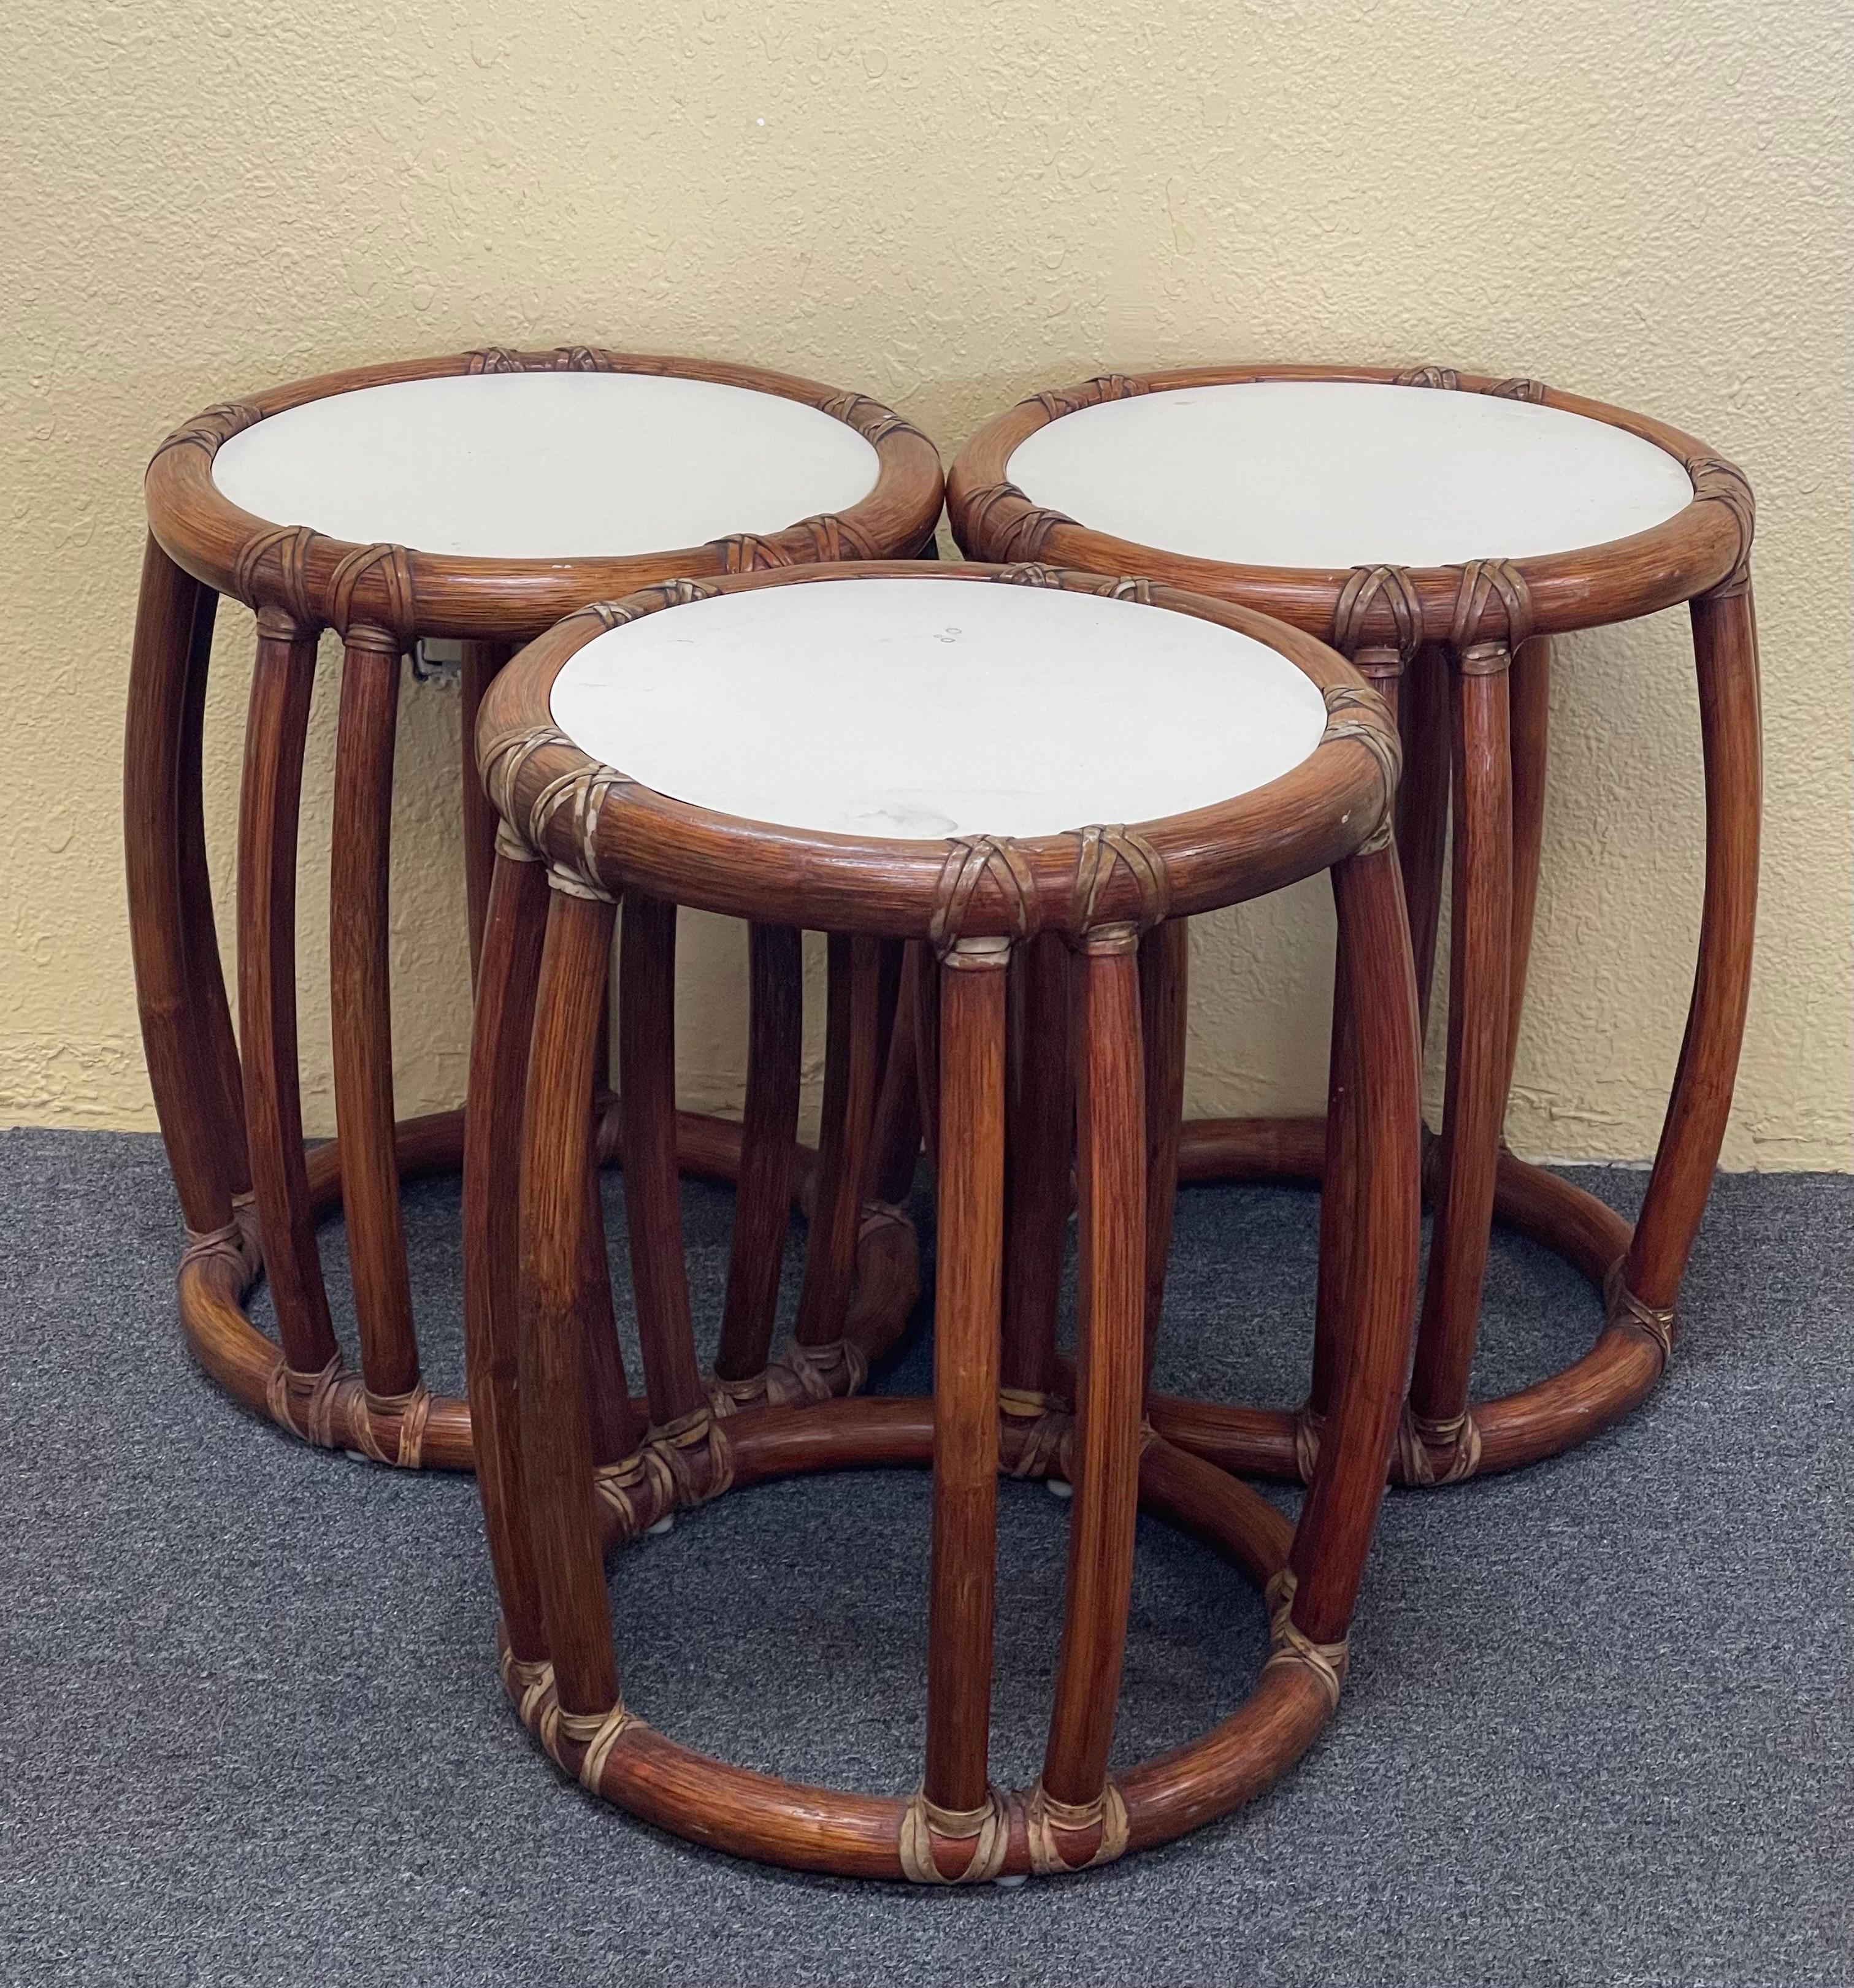 Set of three bamboo side tables / garden stools by McGuire Furniture Co. of San Francisco, circa 1970s. These tables are difficult to find and are in good vintage condition. Each one measures 14